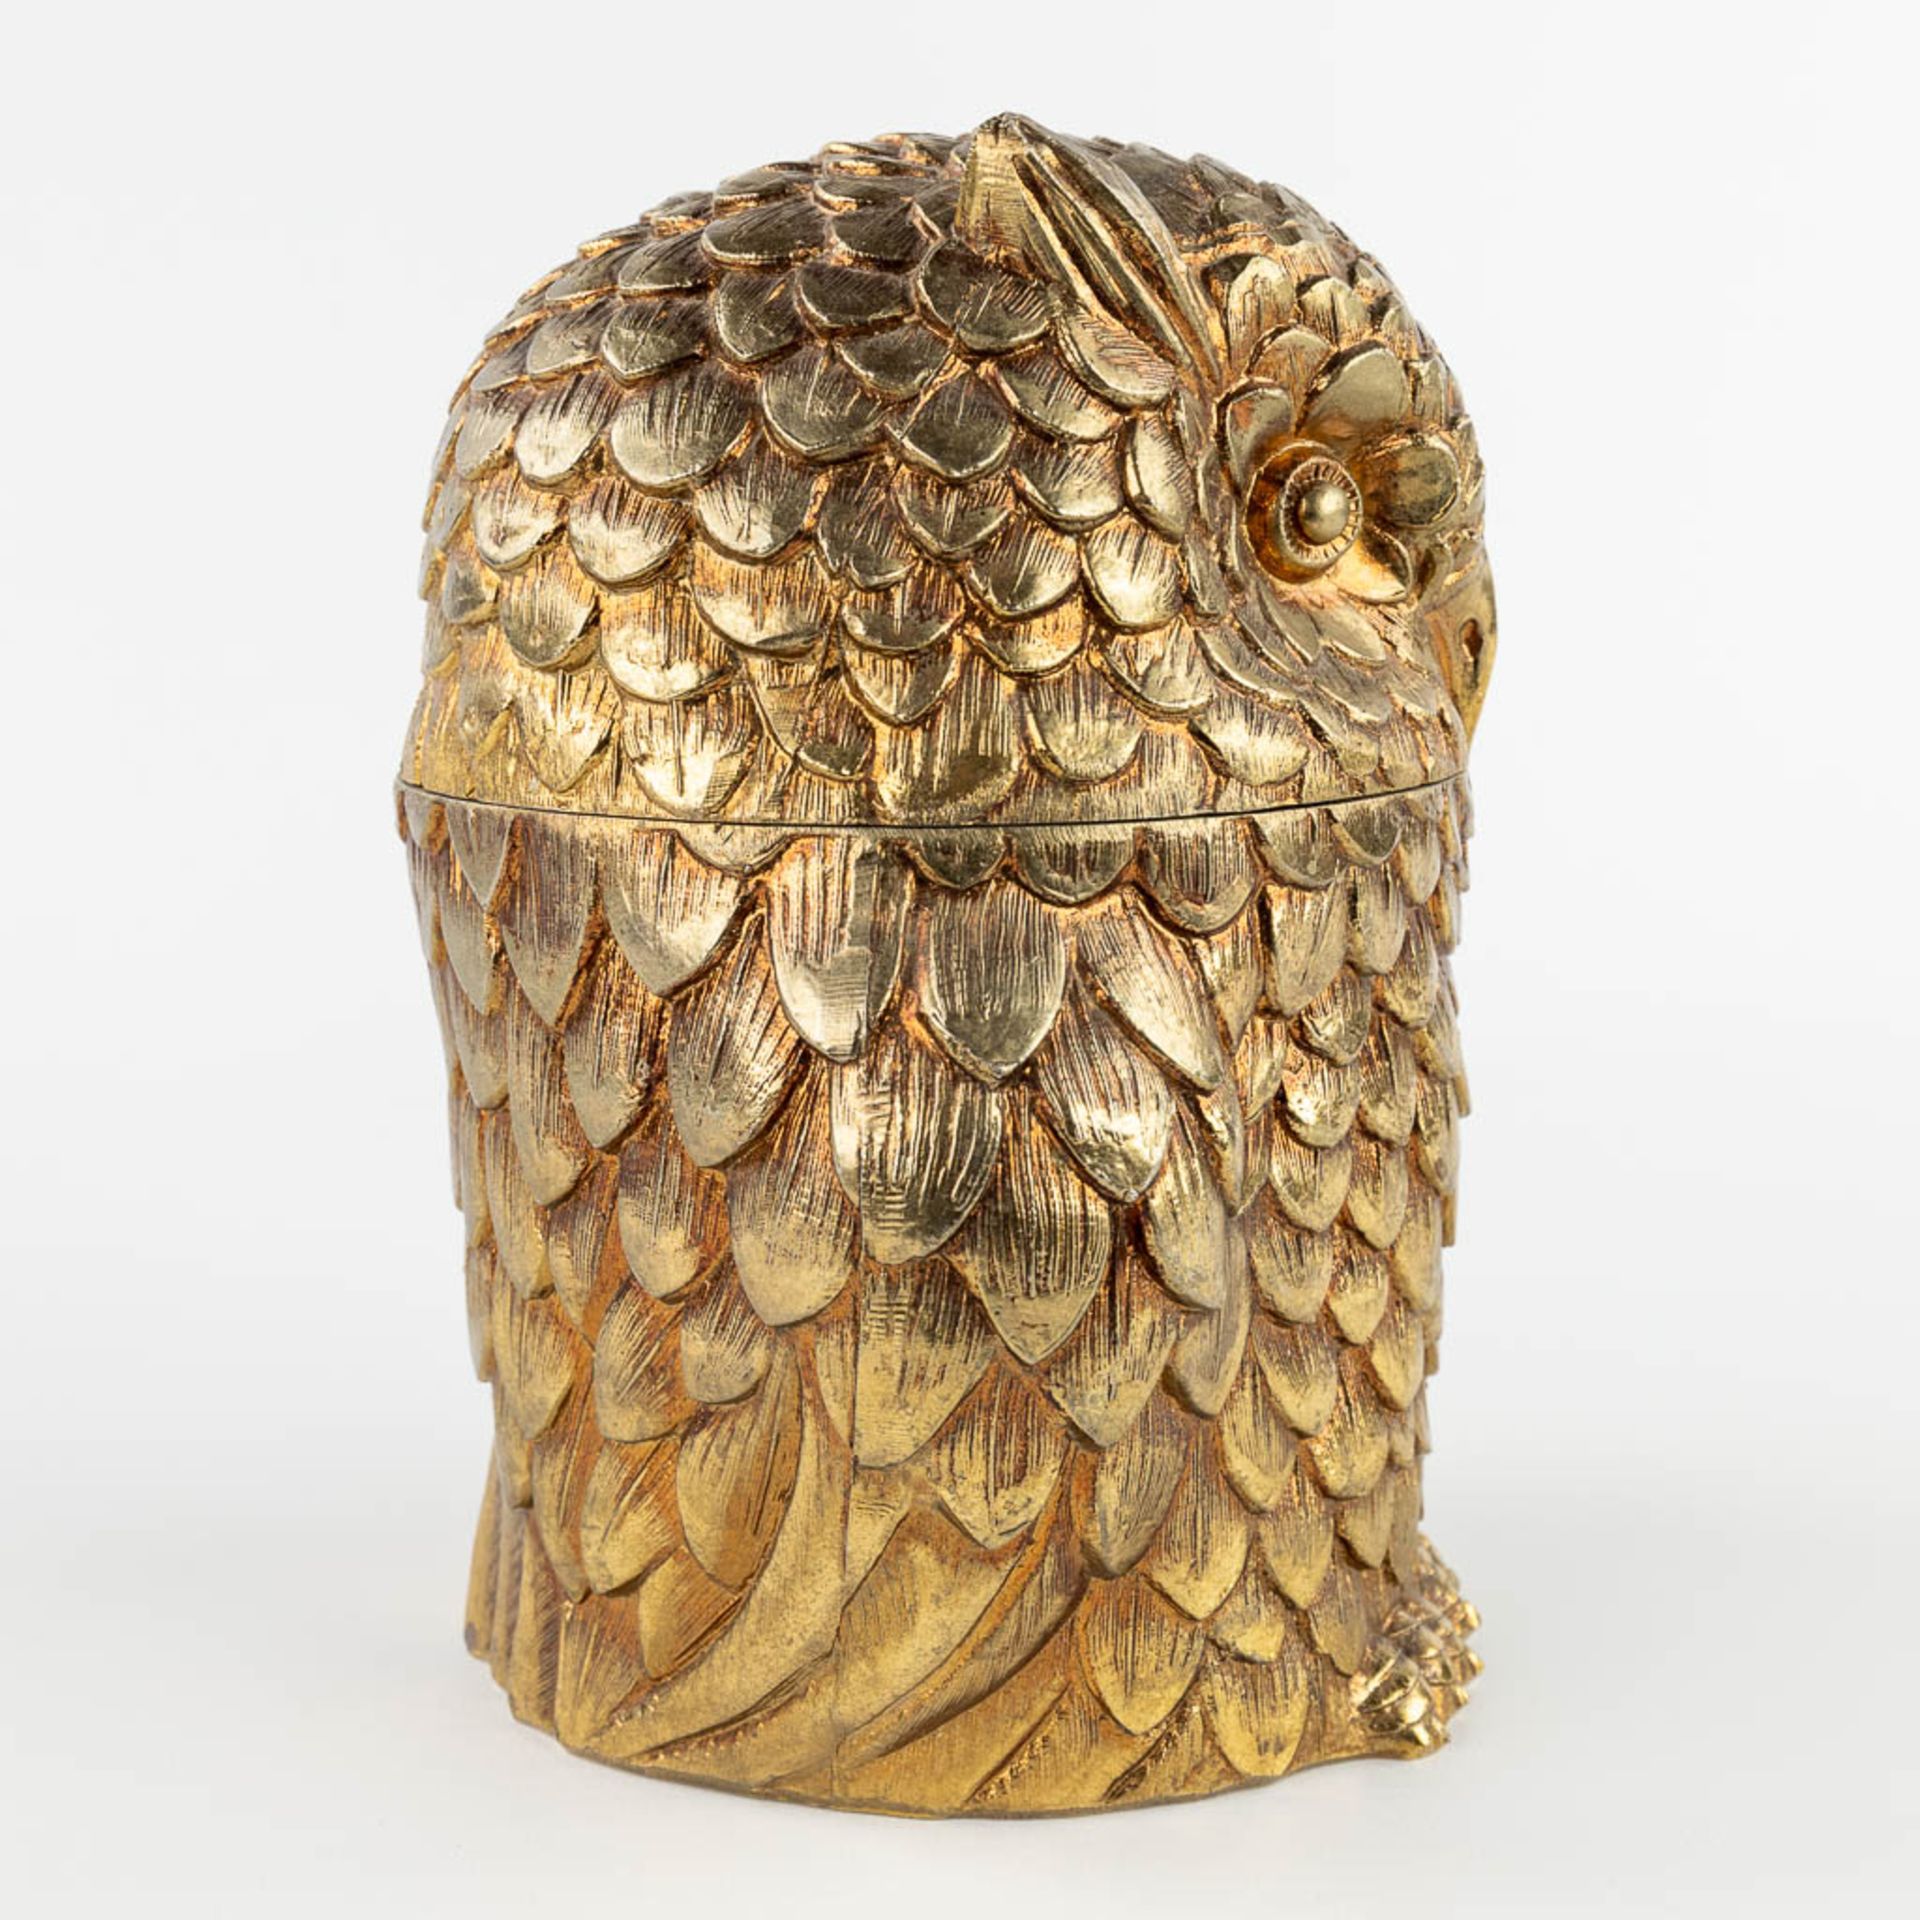 Mauro MANETTI (XX) 'Owl' an ice pail. (H:19 x D:15 cm) - Image 4 of 10